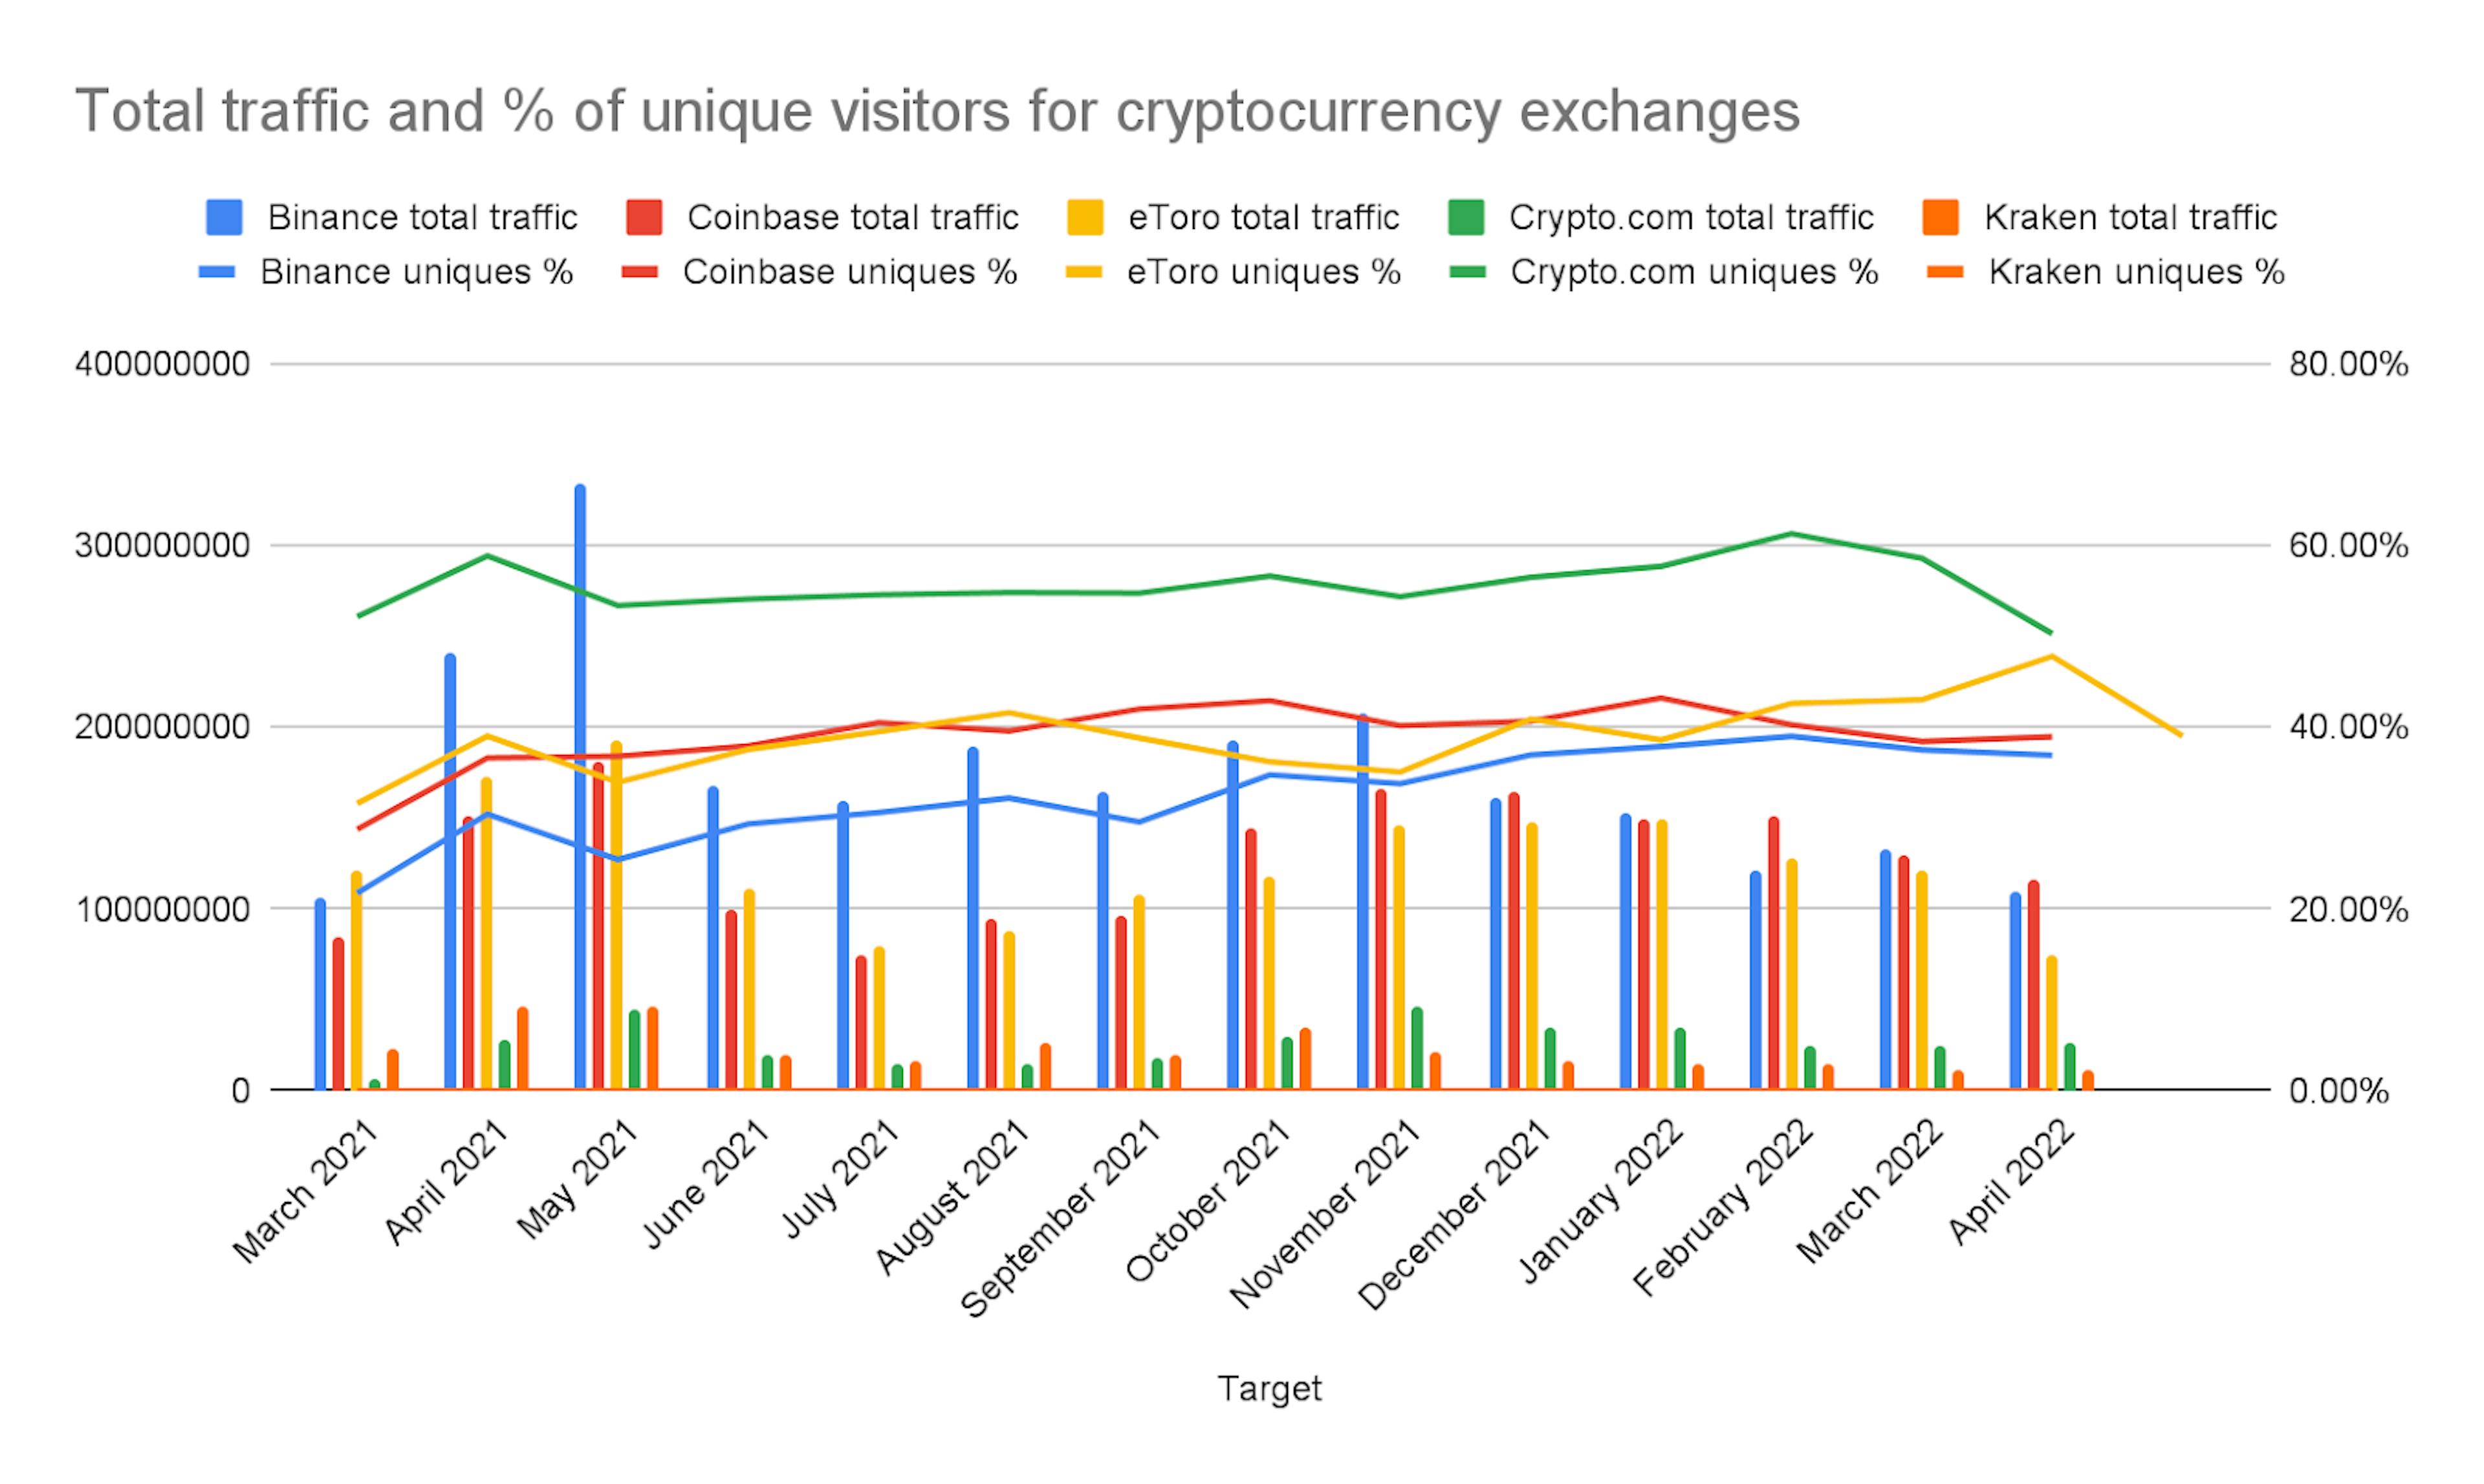 Traffic and unique visitors through cryptocurrency exchange